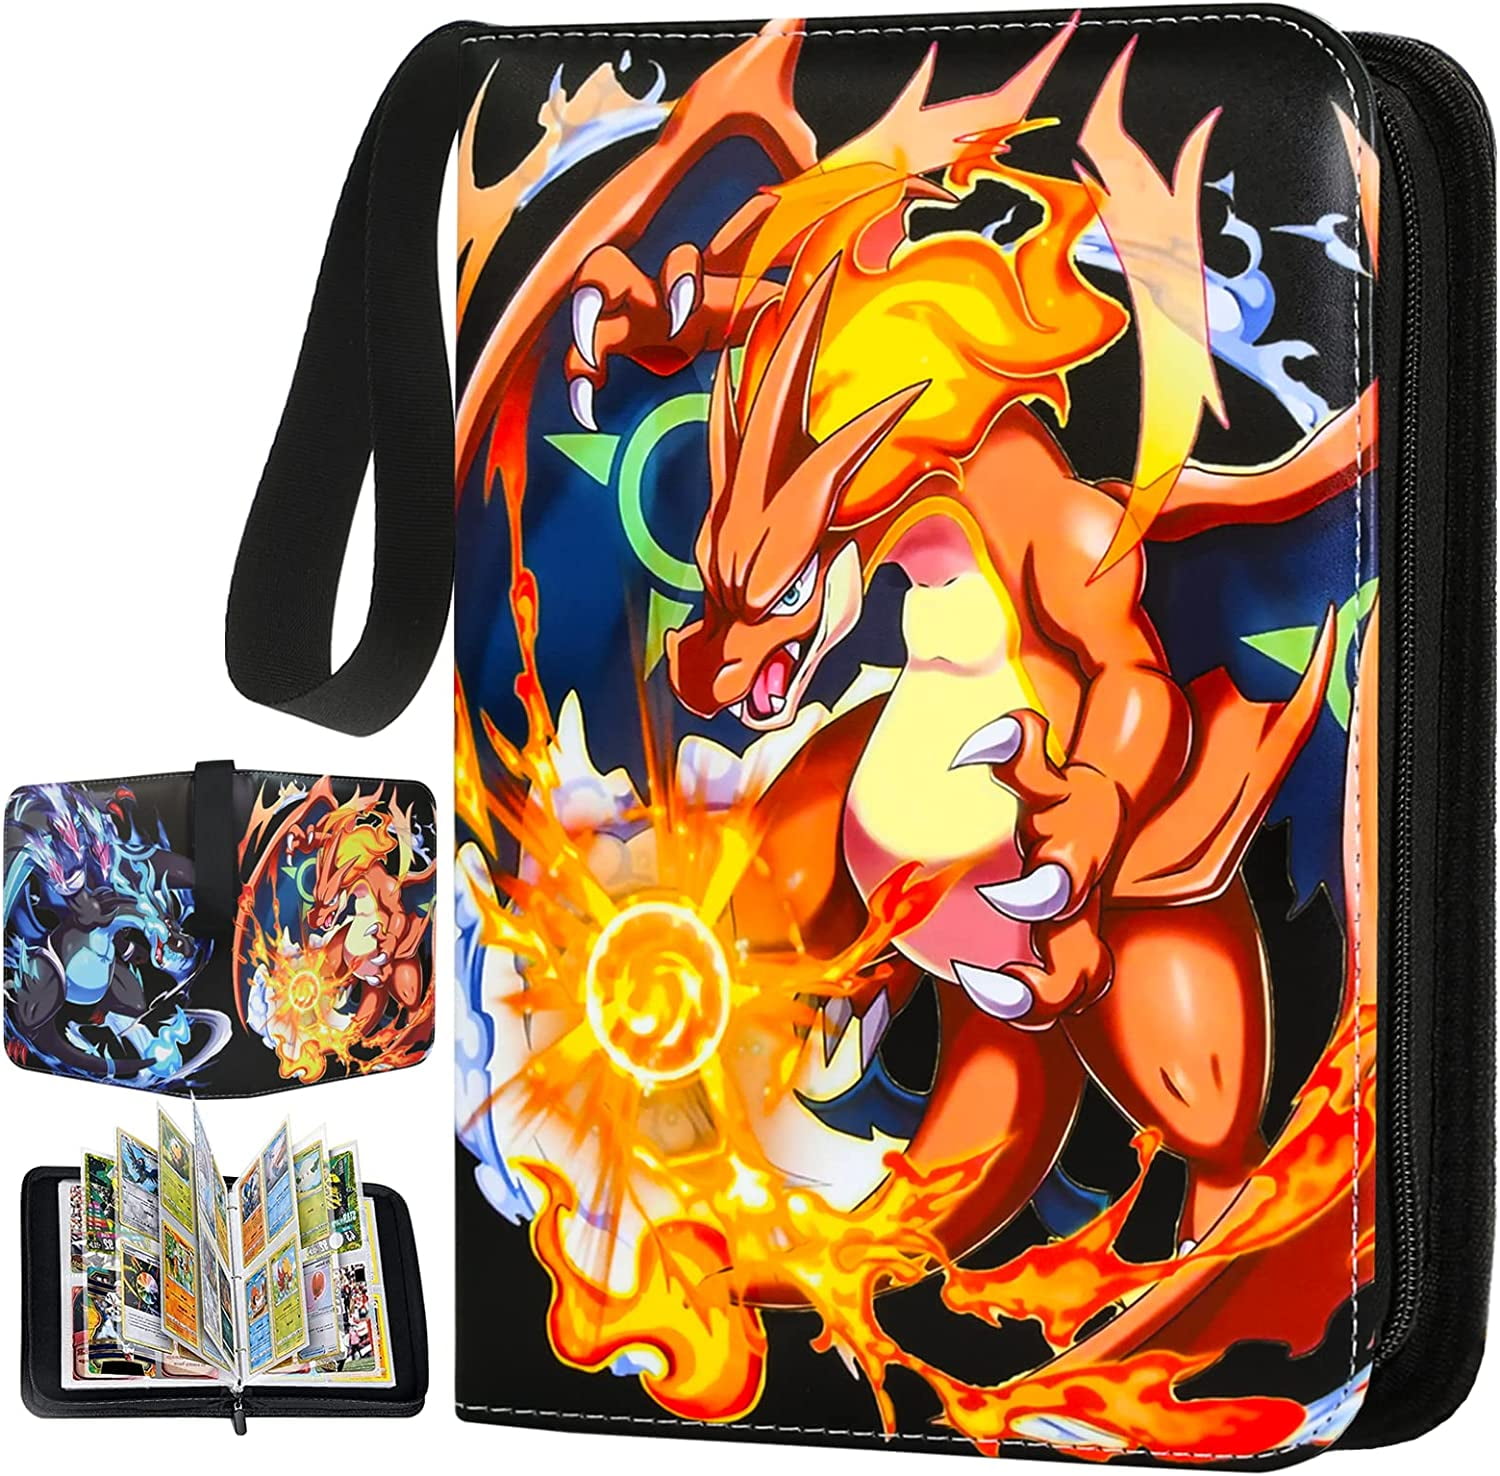 Card Binder for Pokemon Cards Holder 4-Pocket, Trading Card Games  Collection Binder Case Book Fits 400 Cards With 50 Removable Sleeves  Display Storage